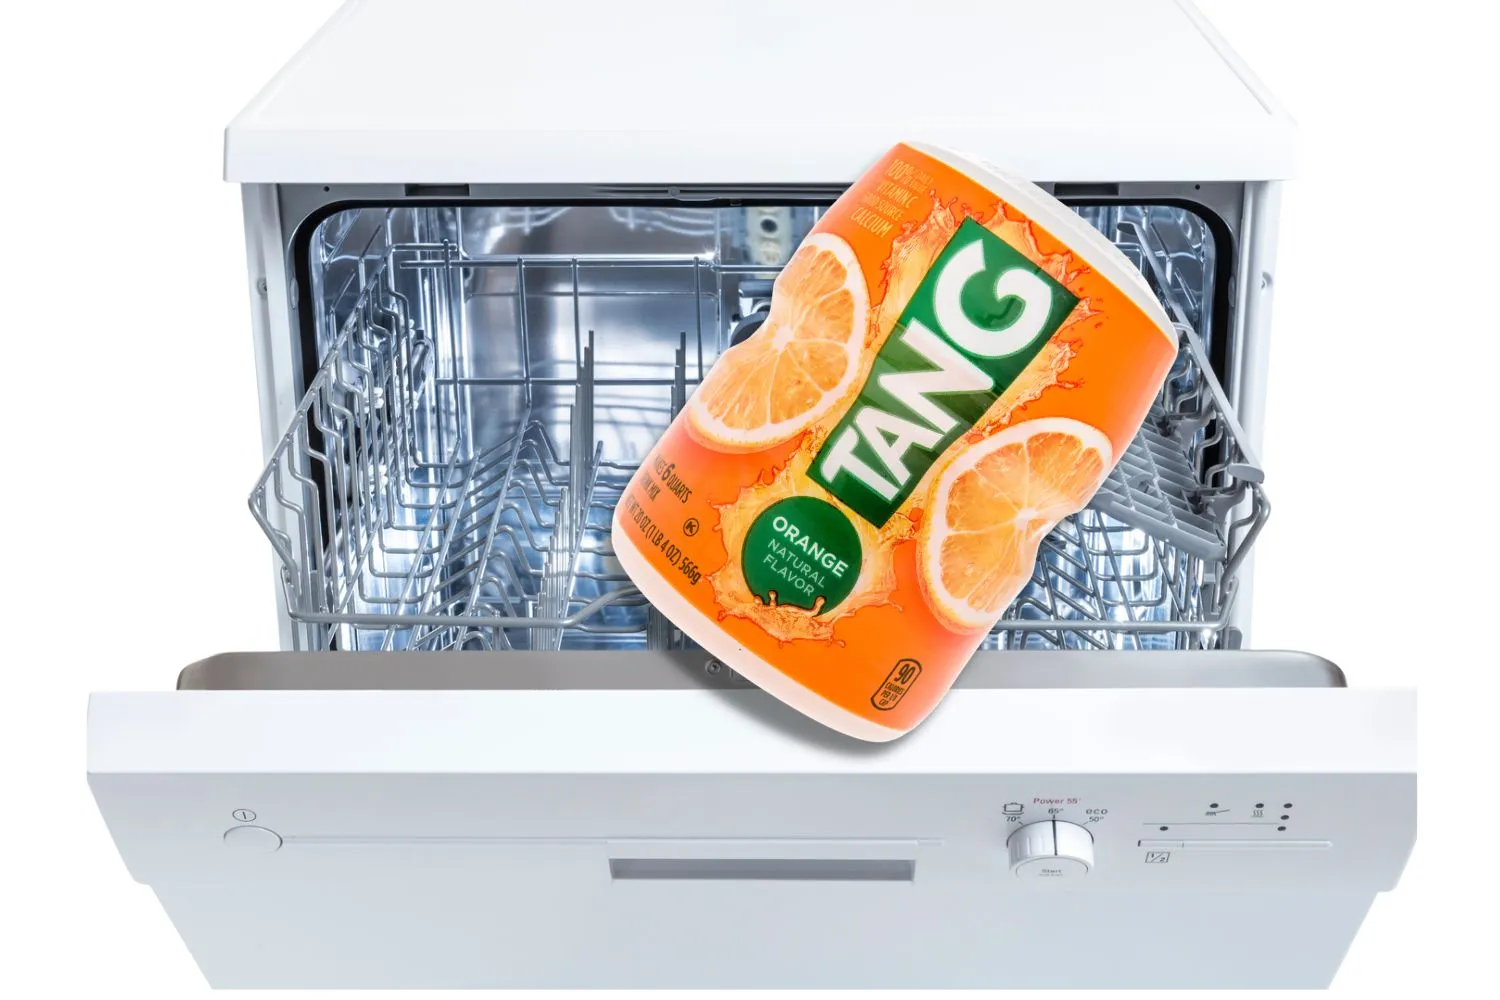 How to Clean a Dishwasher with Tang: The Ultimate Guide